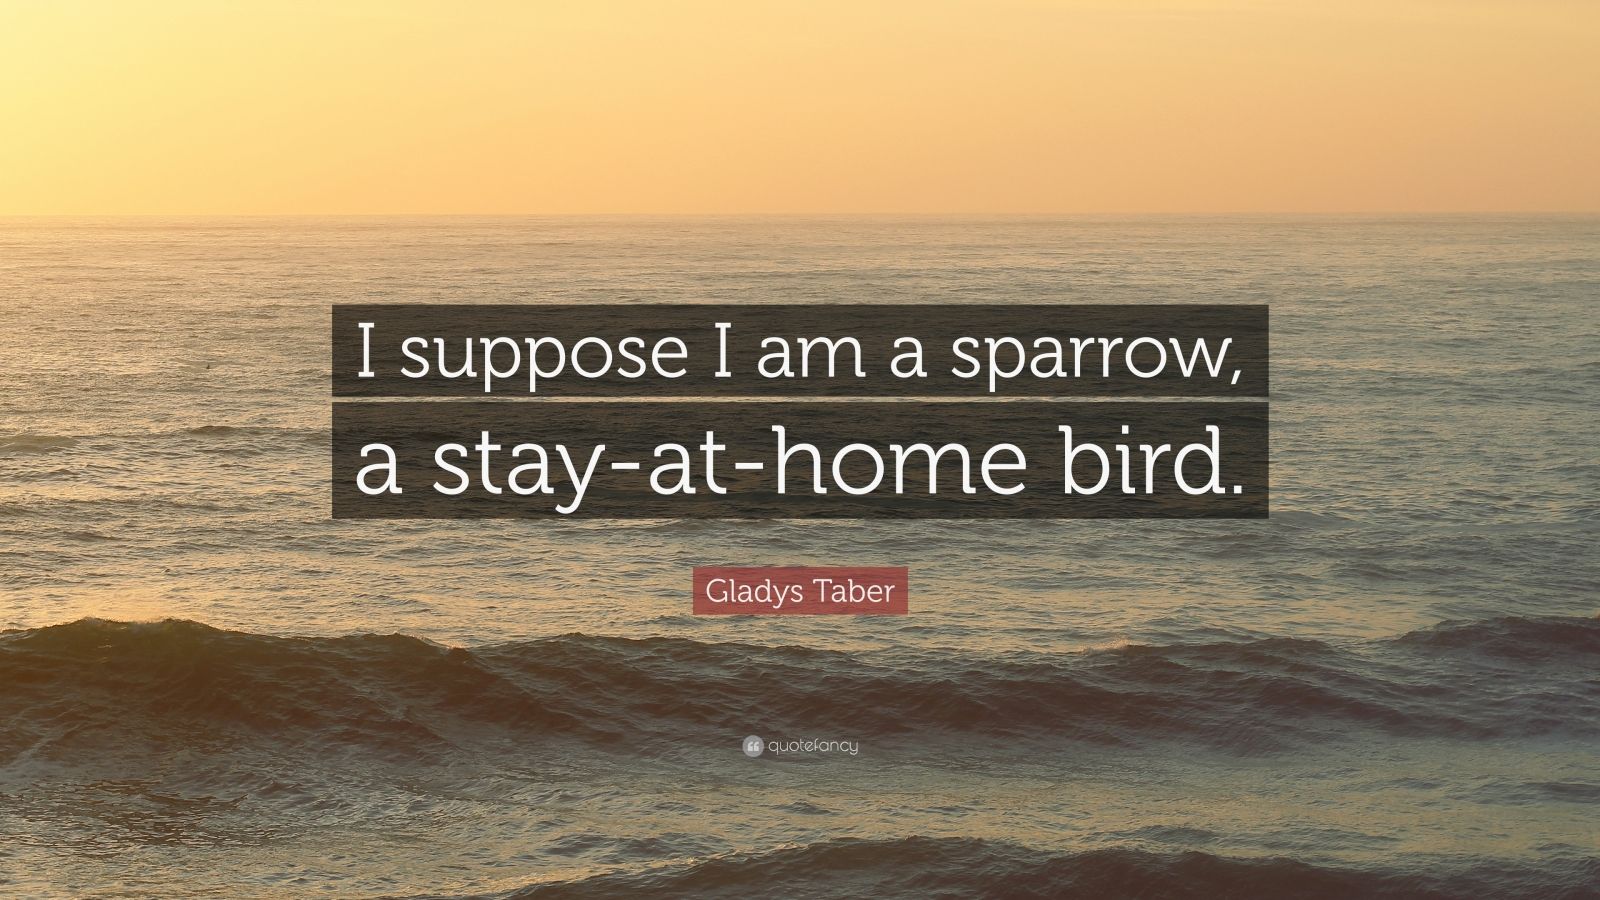 gladys taber quotes